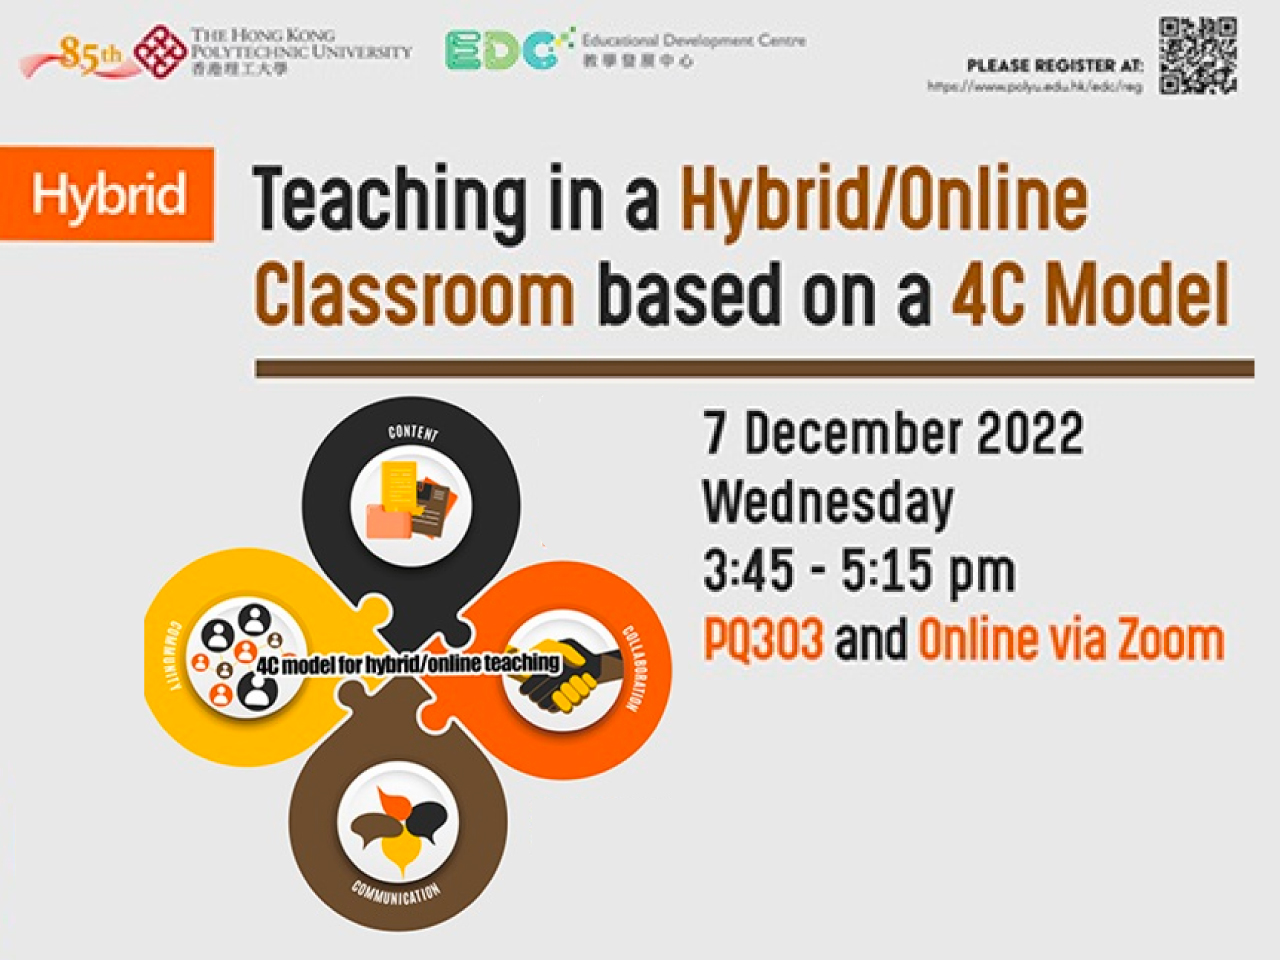 Teaching in a Hybrid/Online Classroom based on a 4C Model